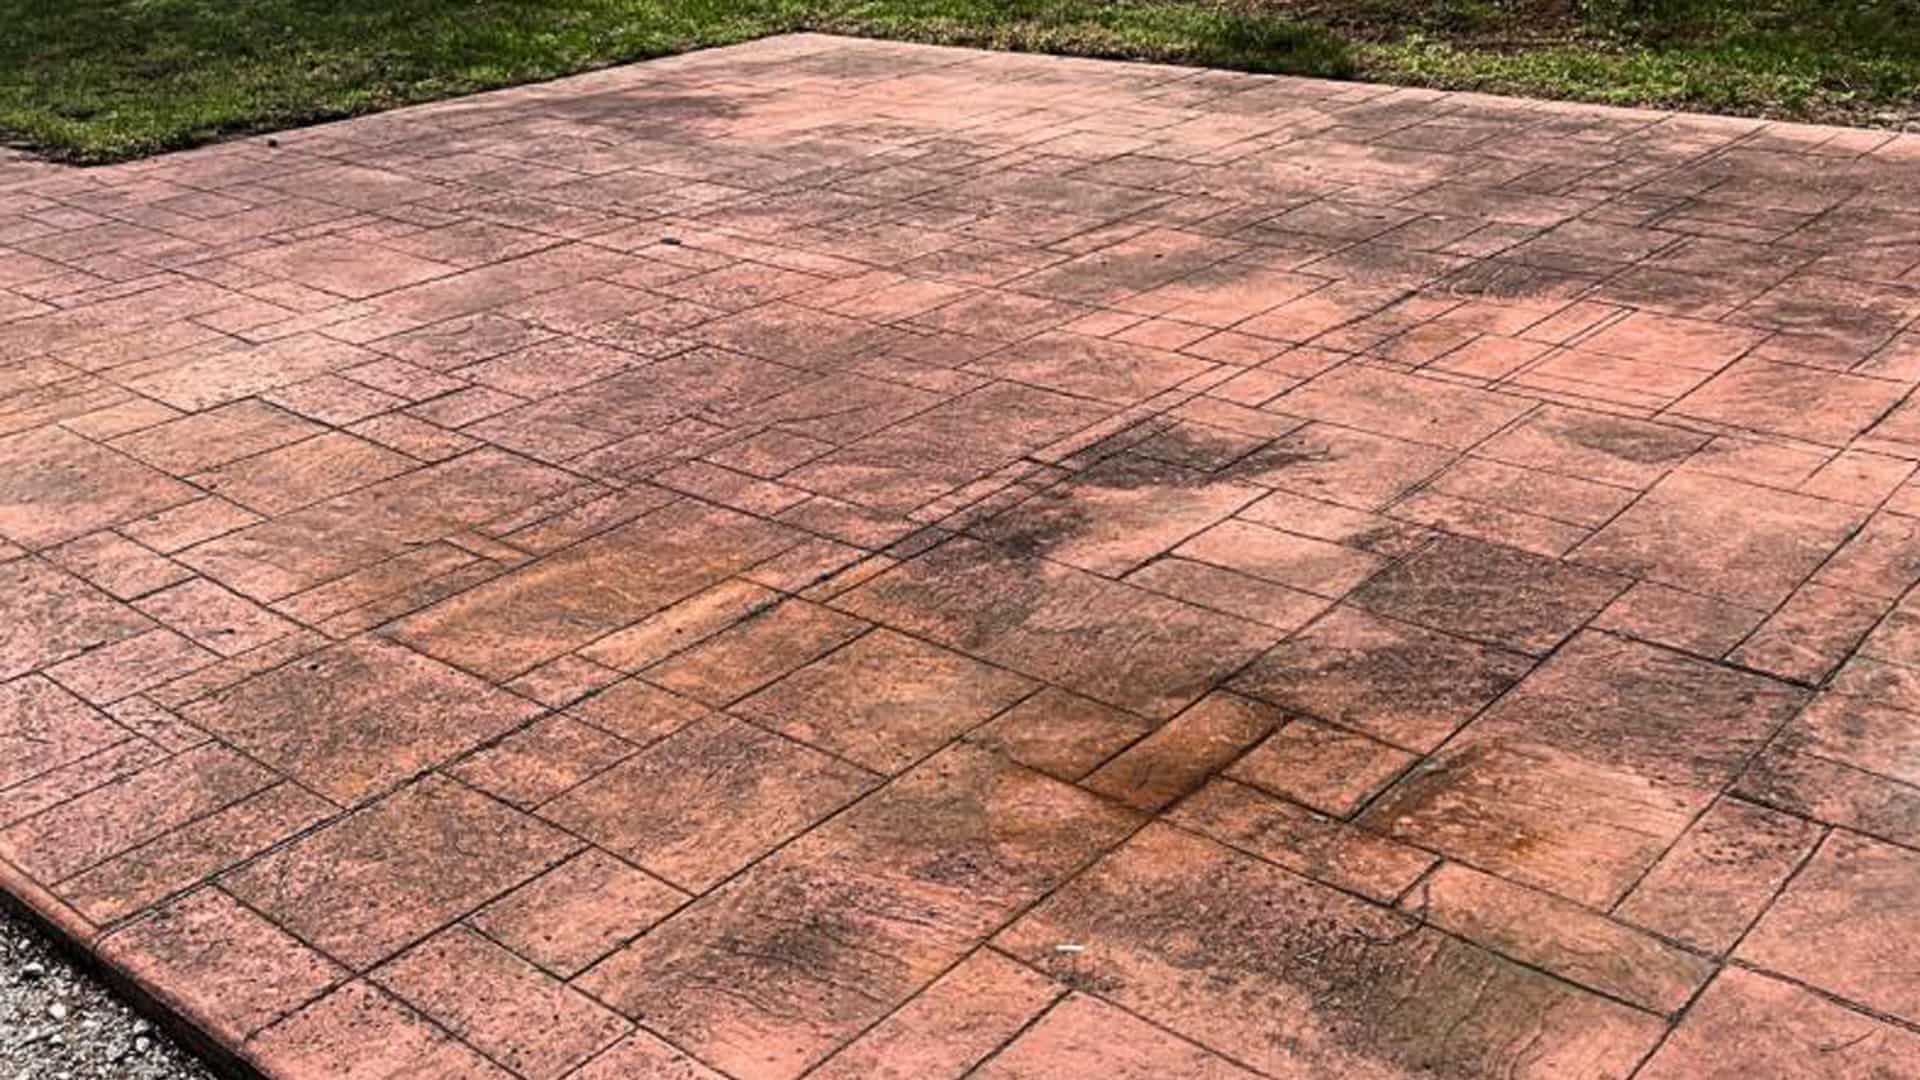 Patio - Before Cleaning